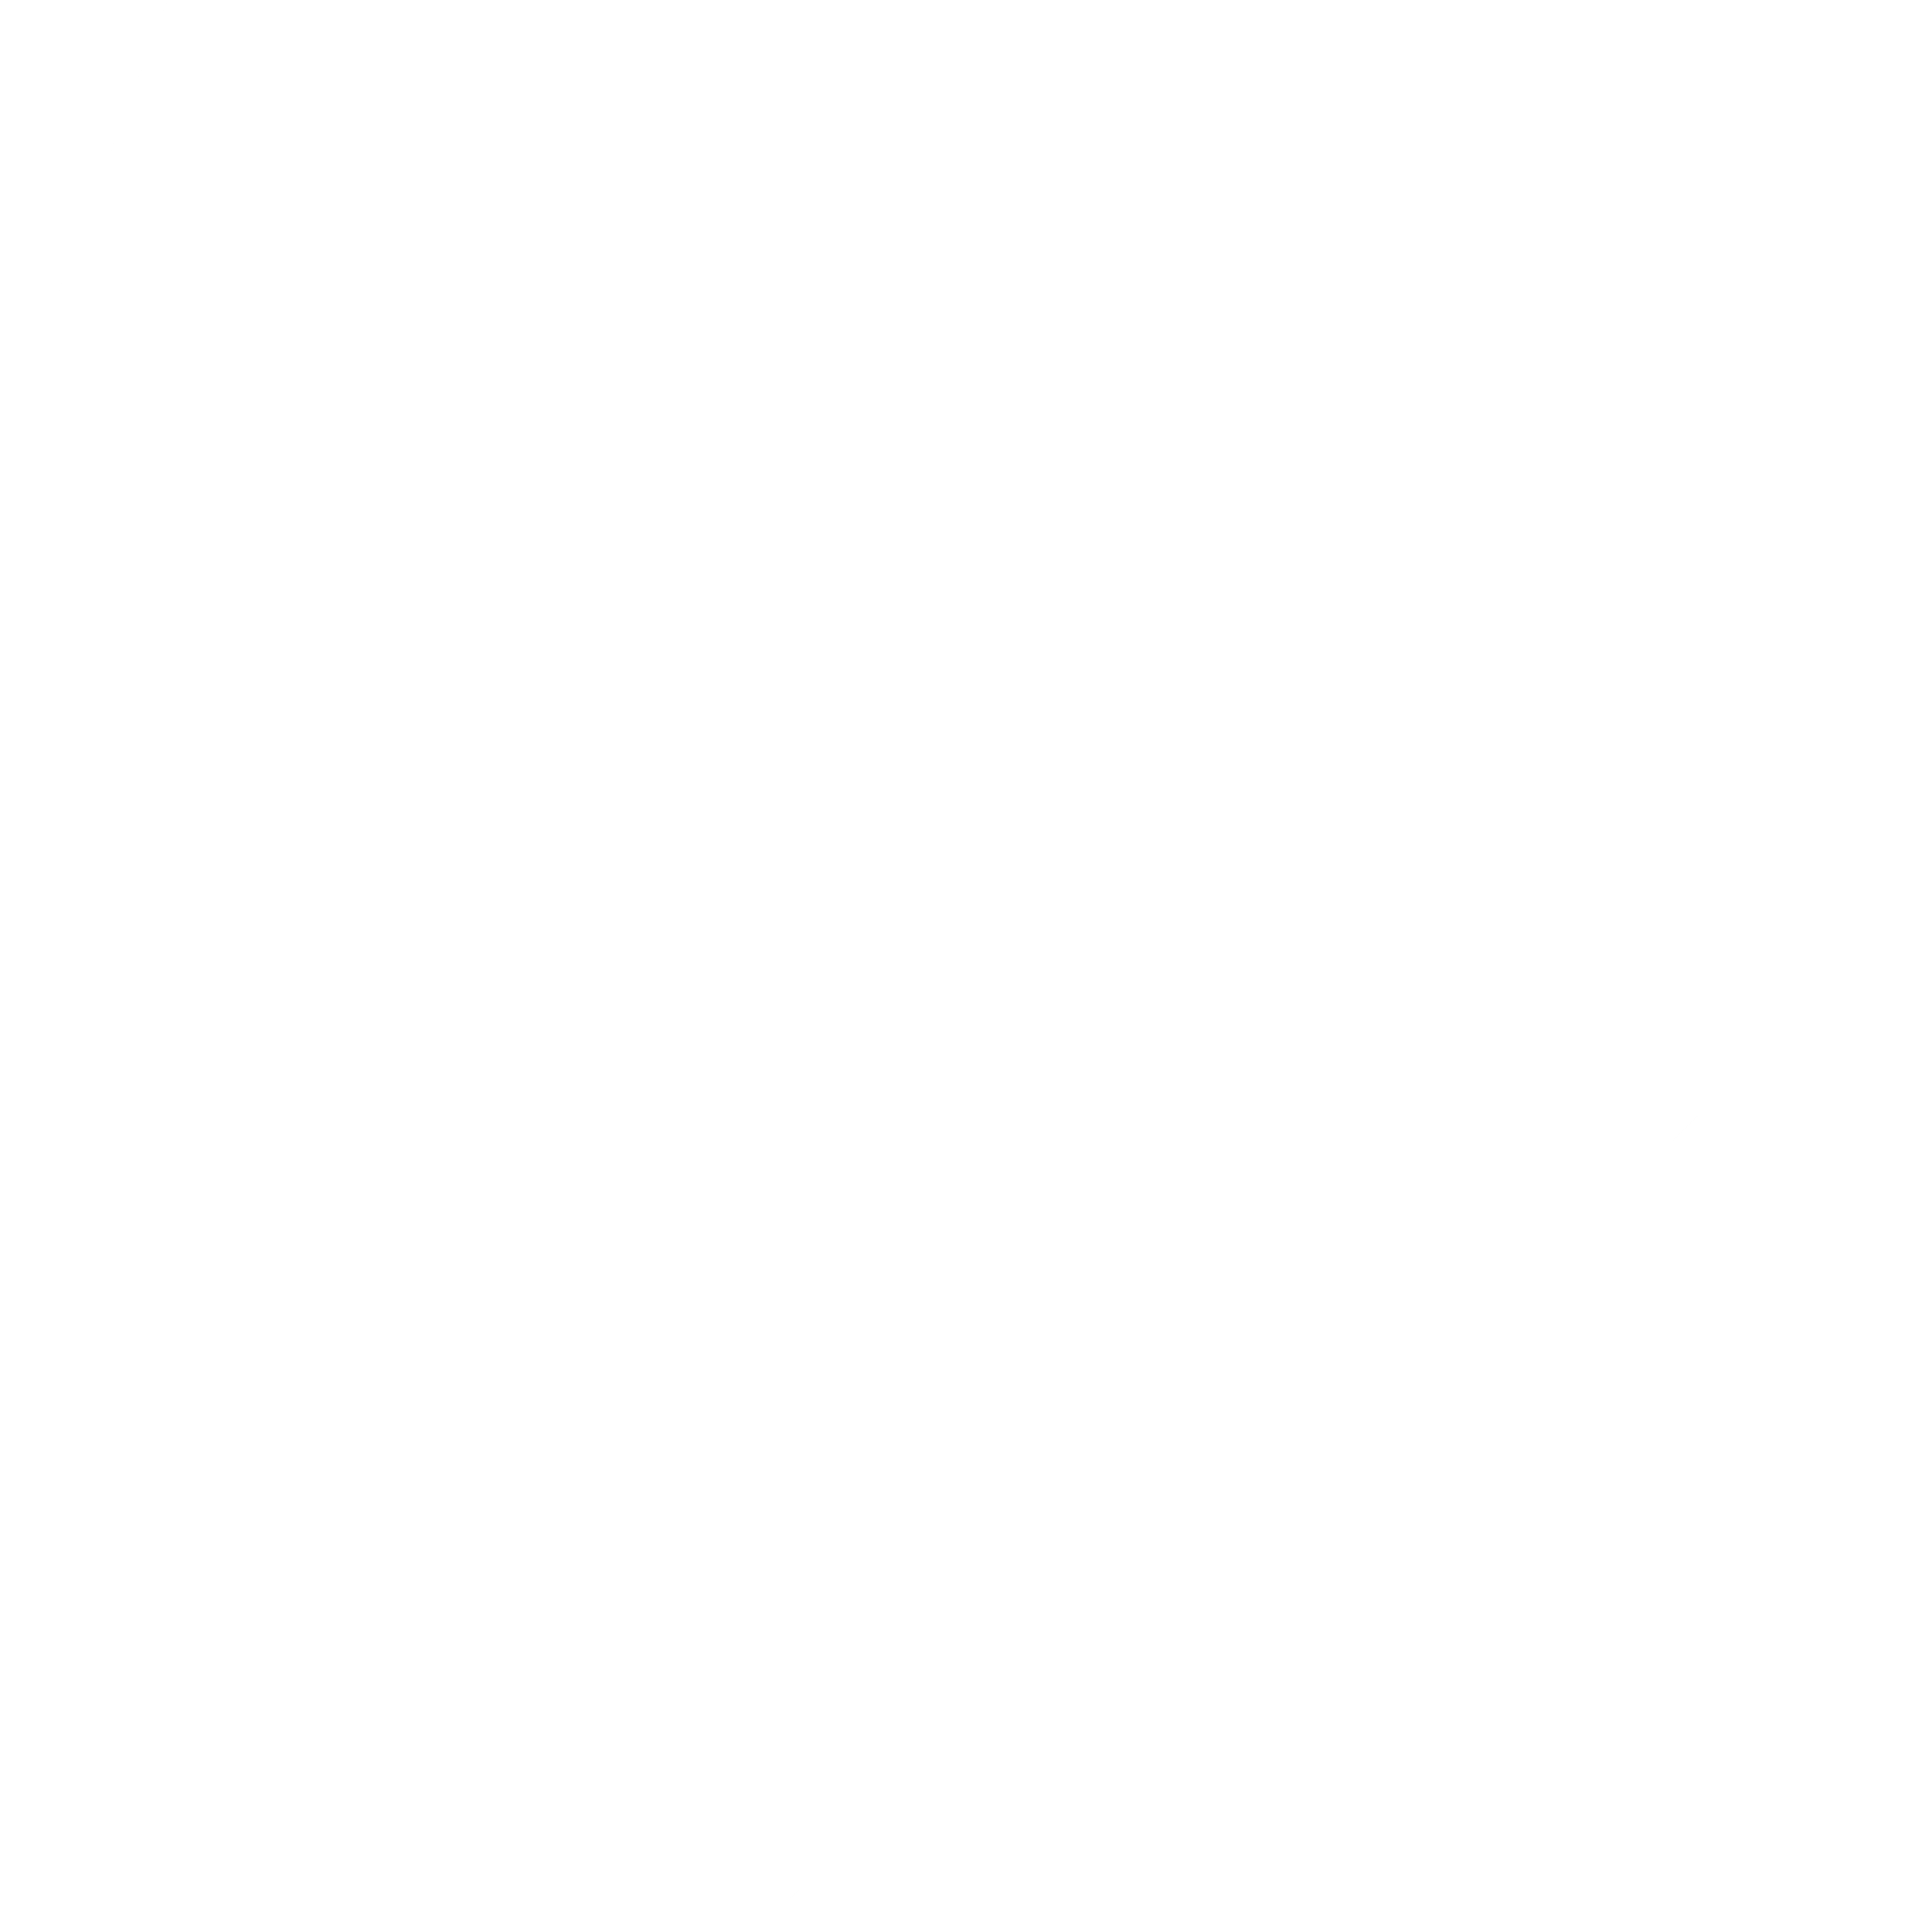 Twitch purple Logo PNG Transparent & SVG Vector - Freebie ... - Twitch white.PNG